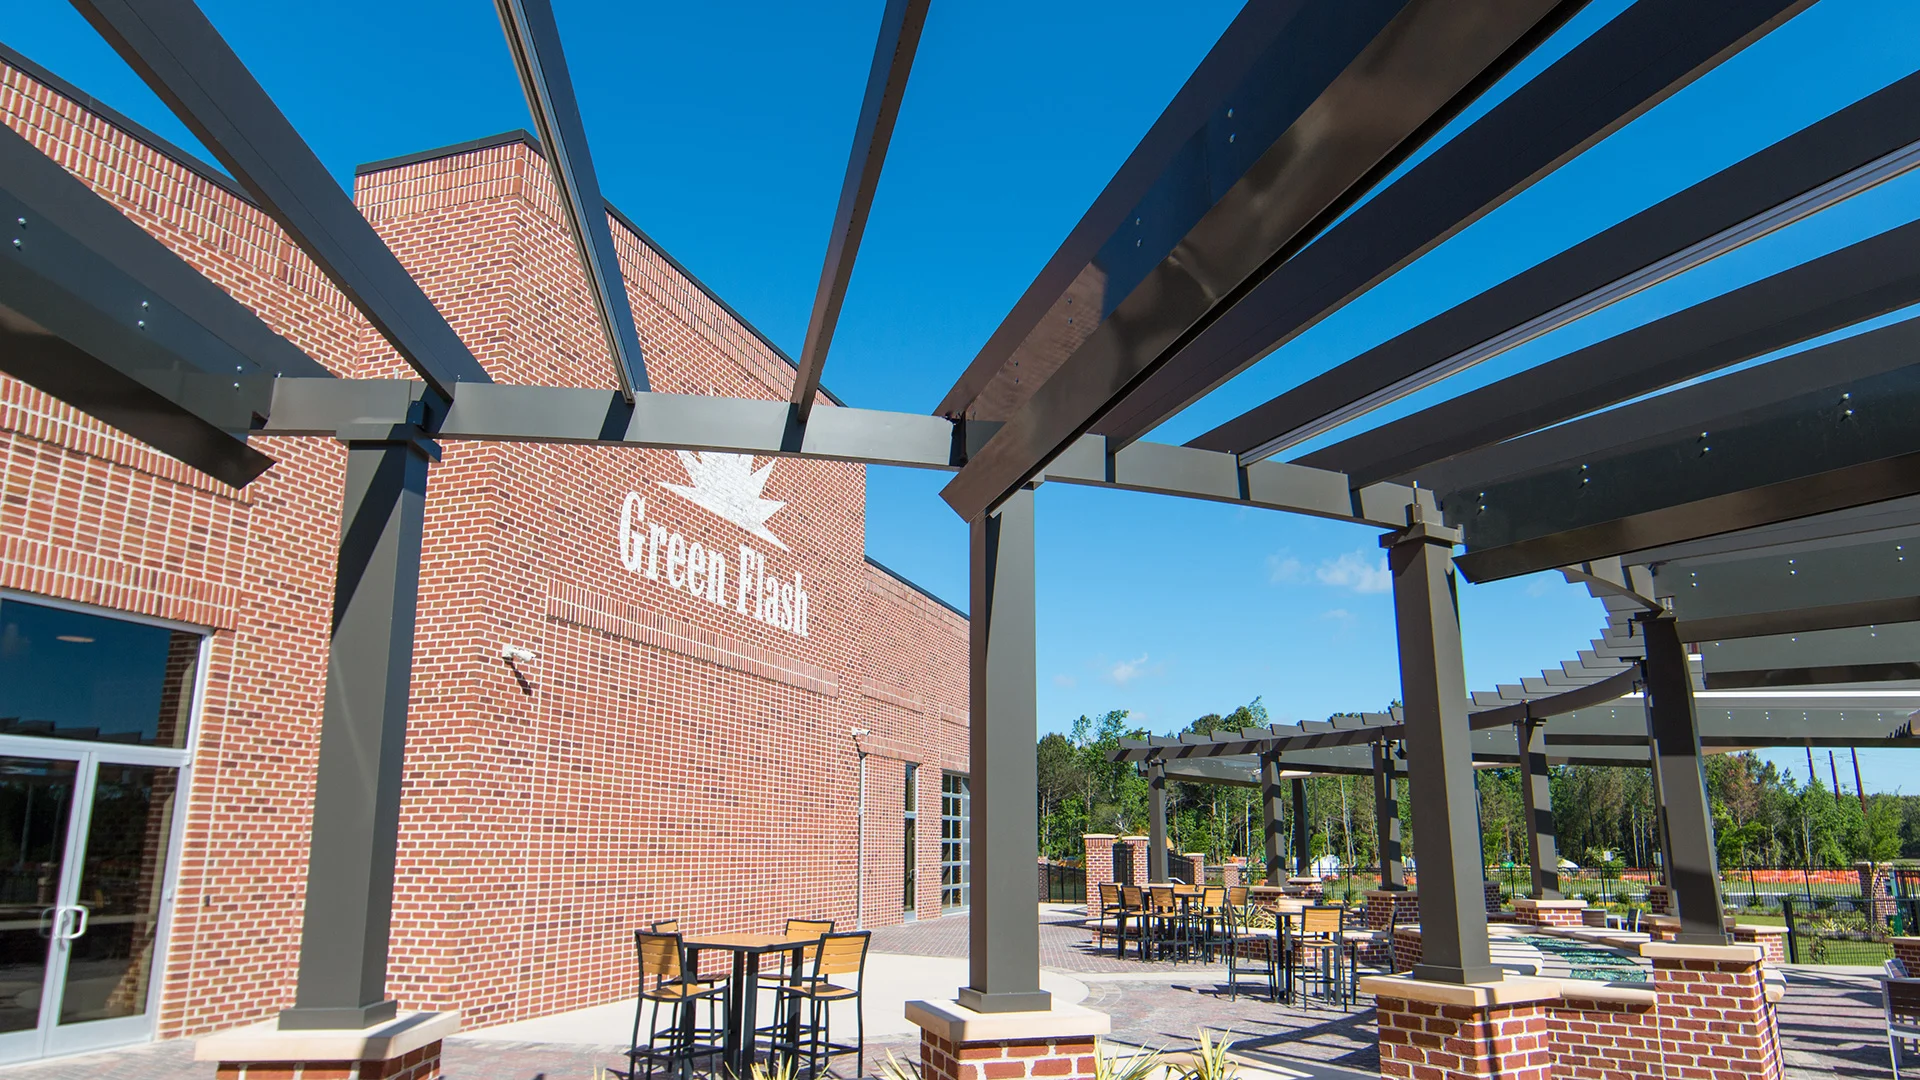 Featured image for “Green Flash Brewery – Radius Trex Pergola with Retractable Canopies”Green Flash Brewing has transformed their large outdoor patio into a spectacular beer haven! This beautiful, fully functional, custom Trex Pergola frames the beer garden’s curves with a12484:full